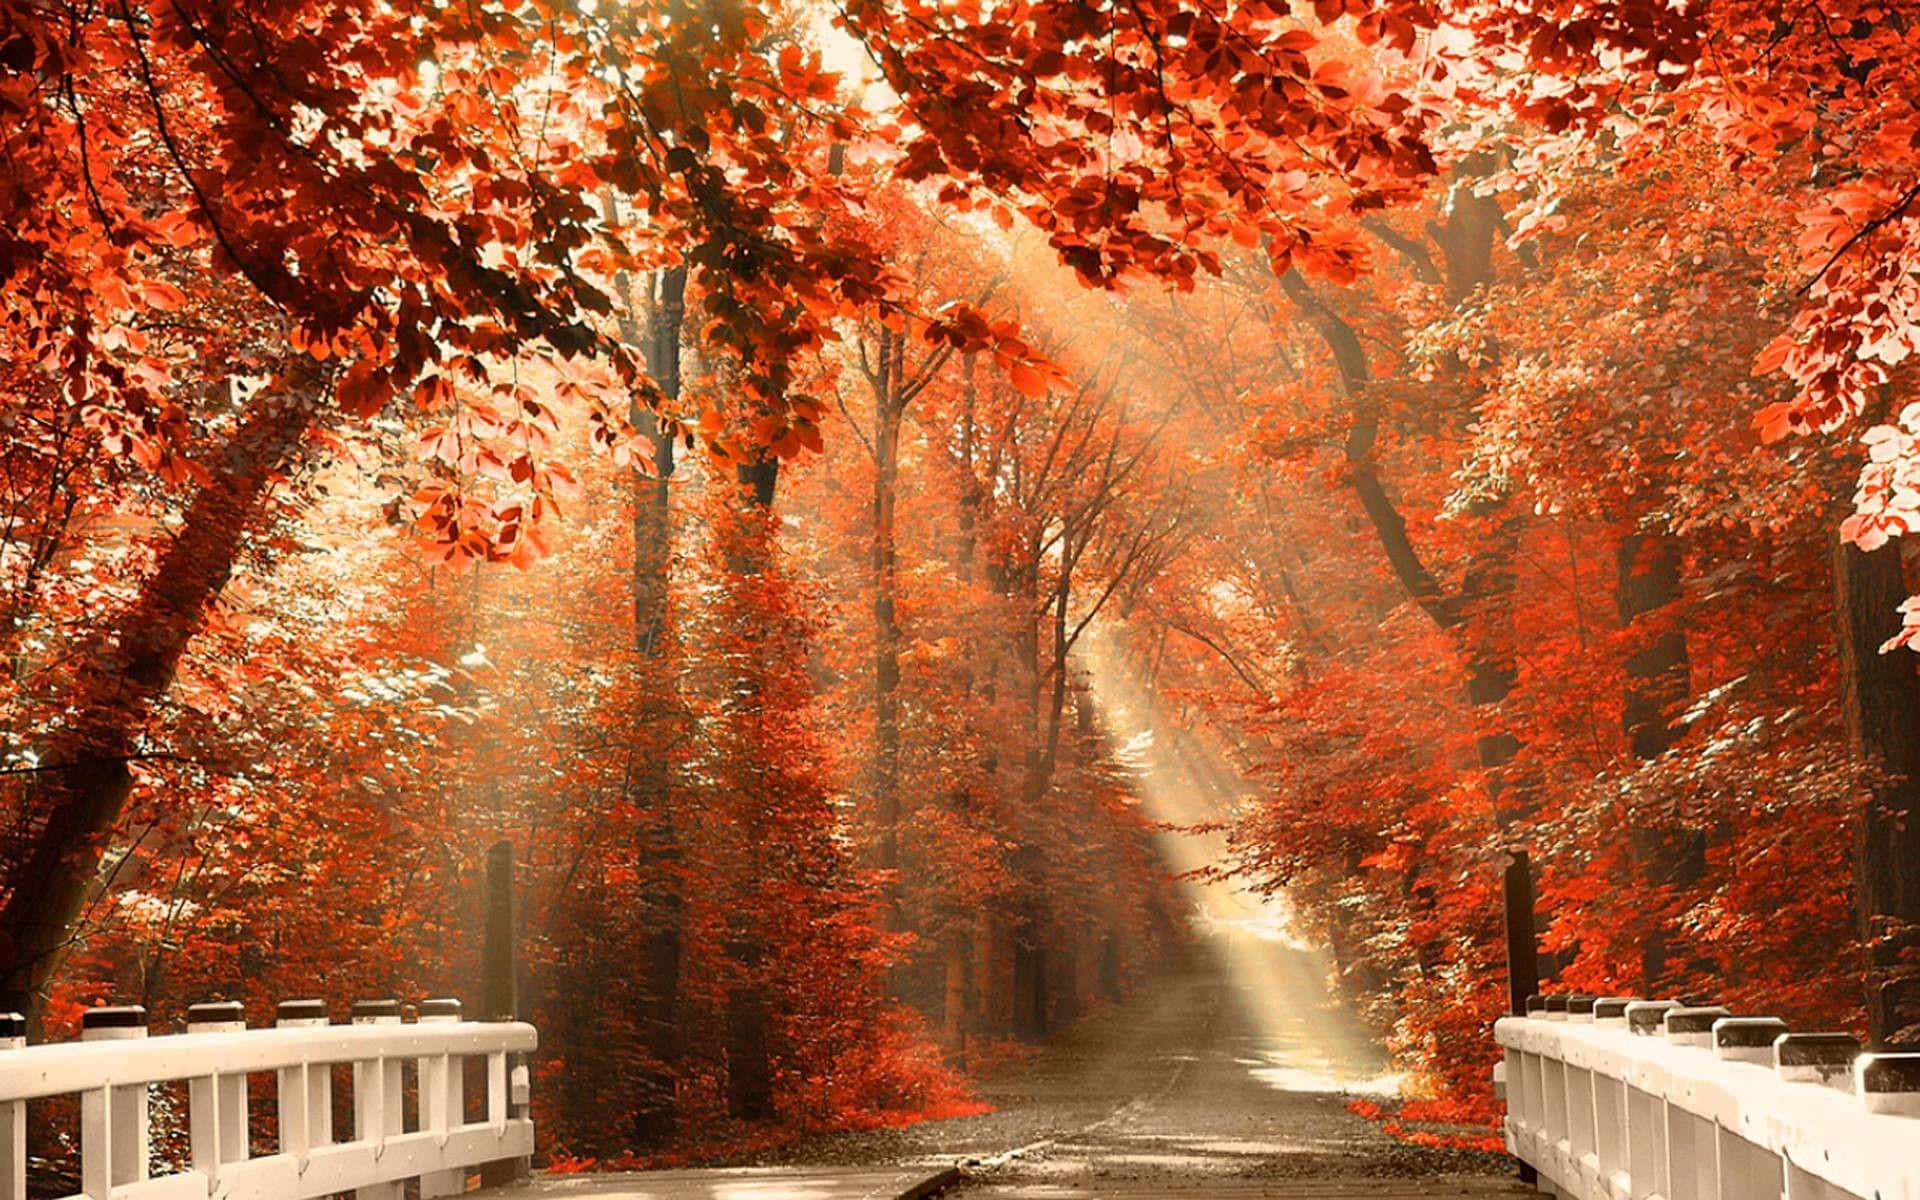 Enjoy the beauty and serenity of Fall